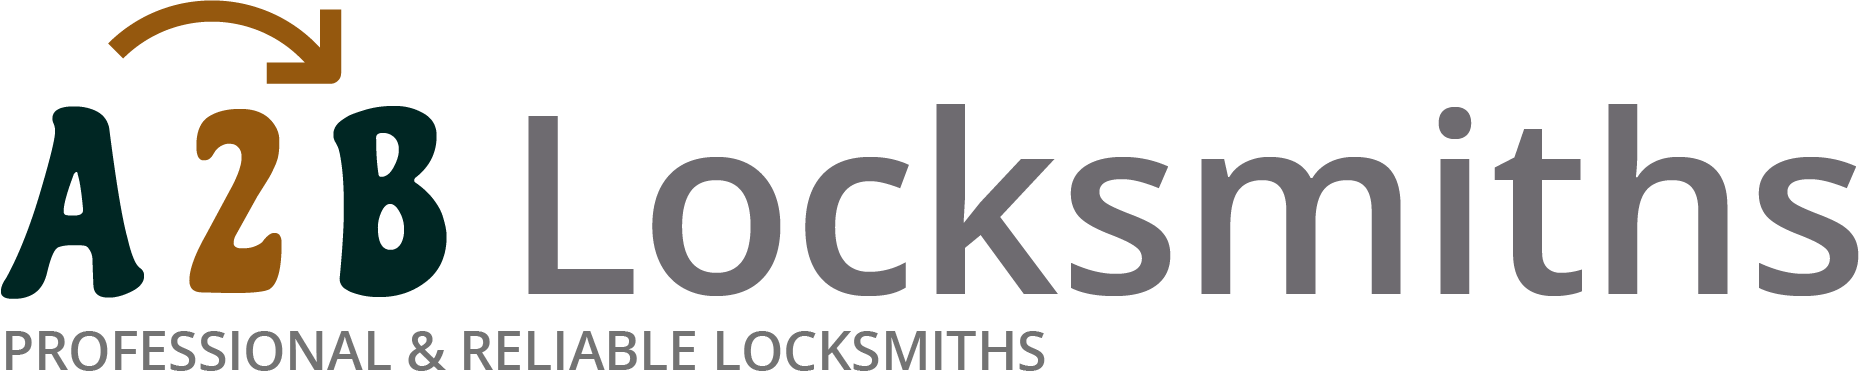 If you are locked out of house in Portchester, our 24/7 local emergency locksmith services can help you.